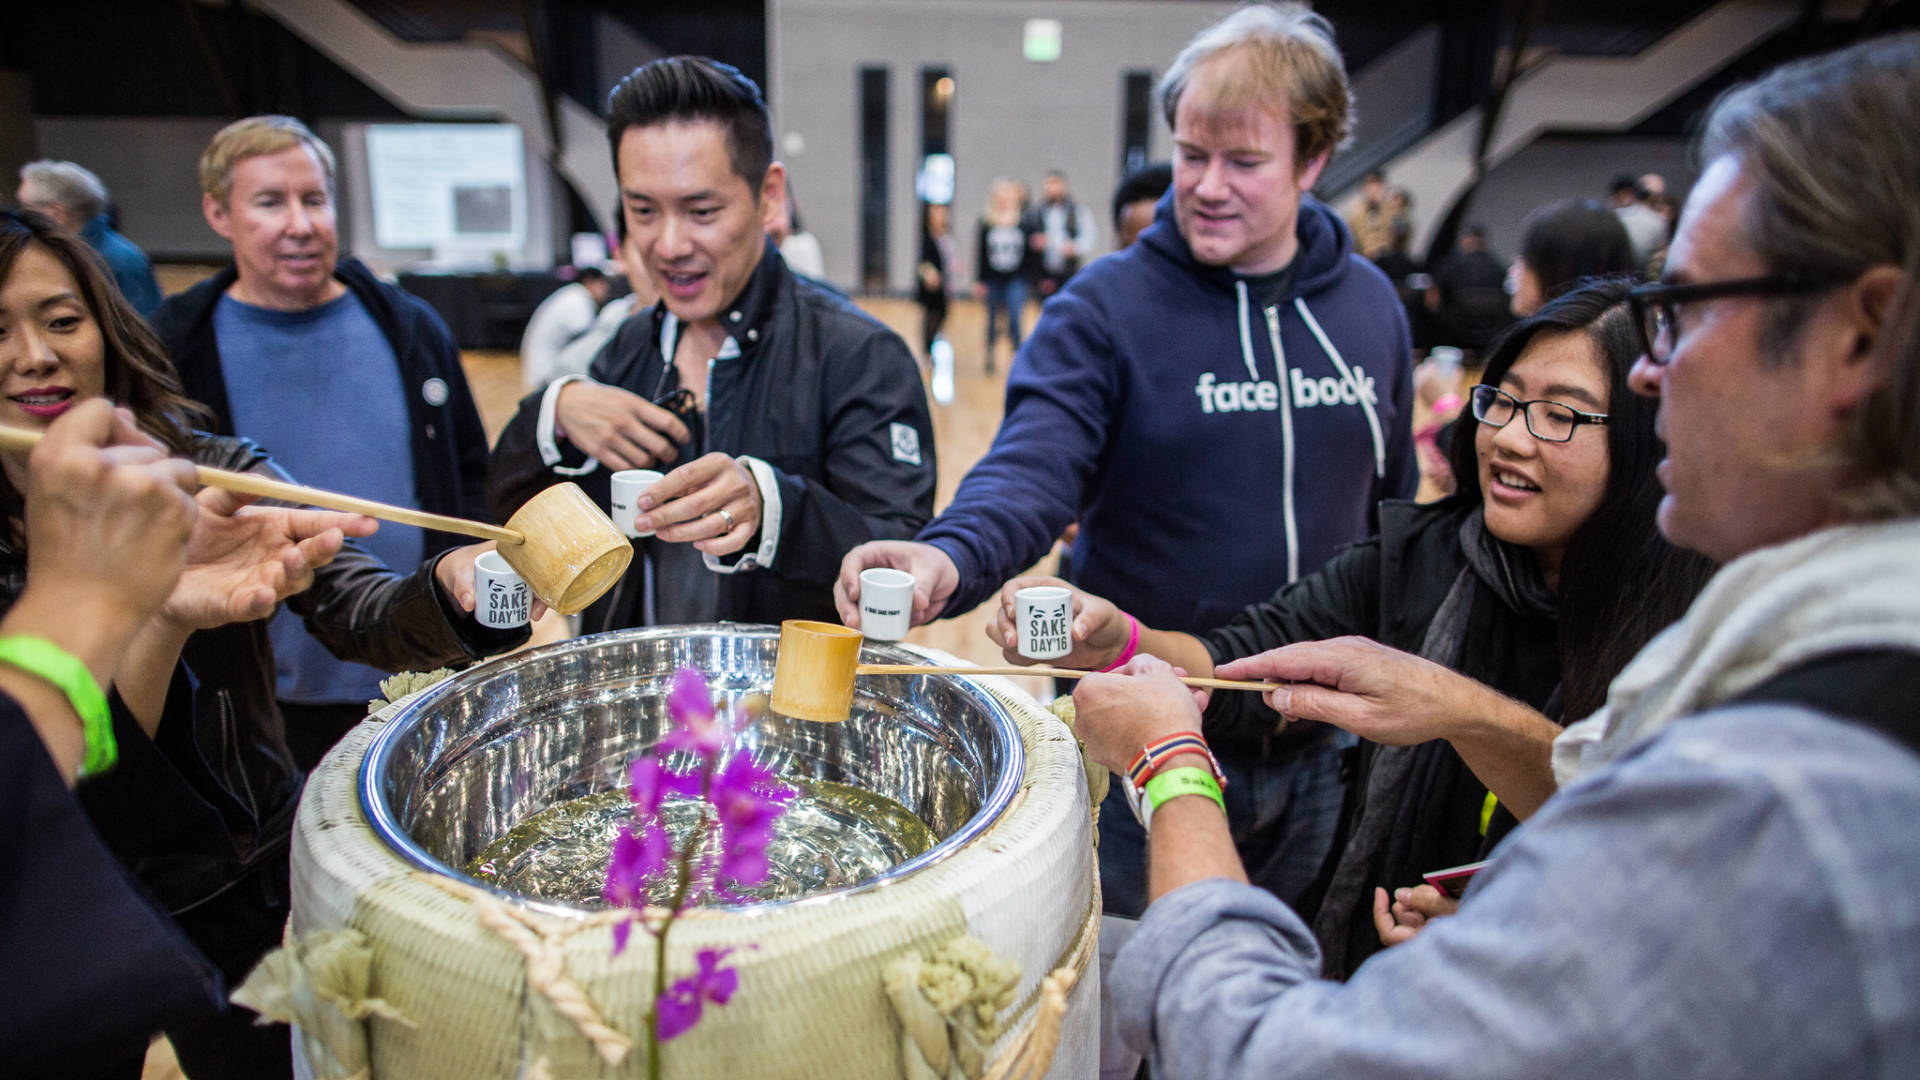 Explore and taste special sakes that aren’t available in the U.S. at Sake Day.